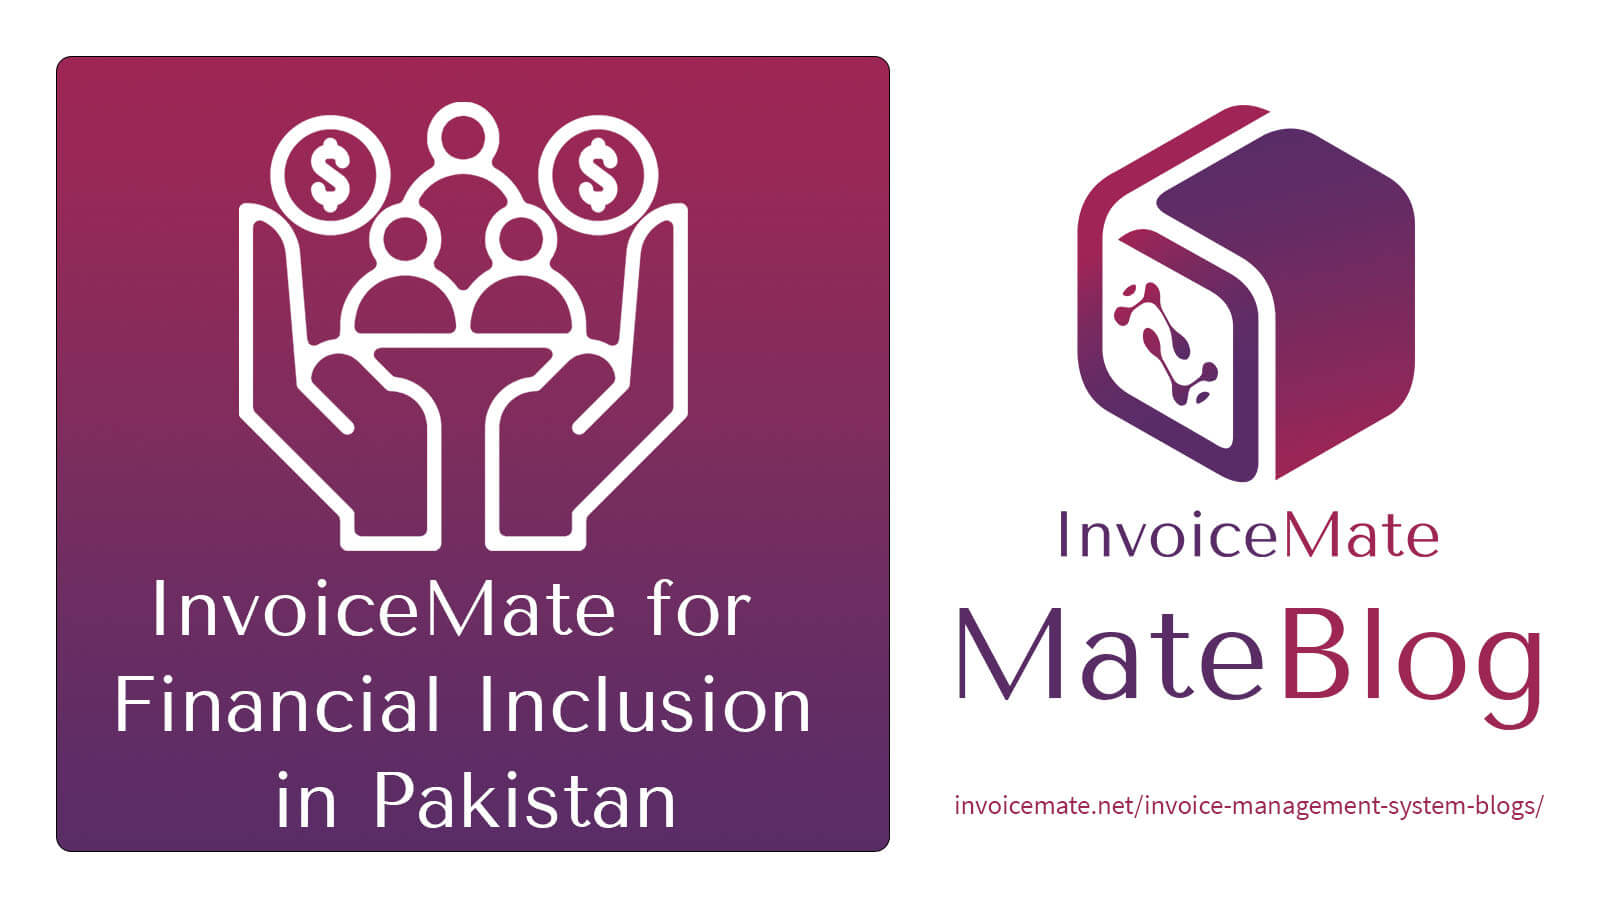 InvoiceMate for Financial Inclusion in Pakistan Through Invoice Financing